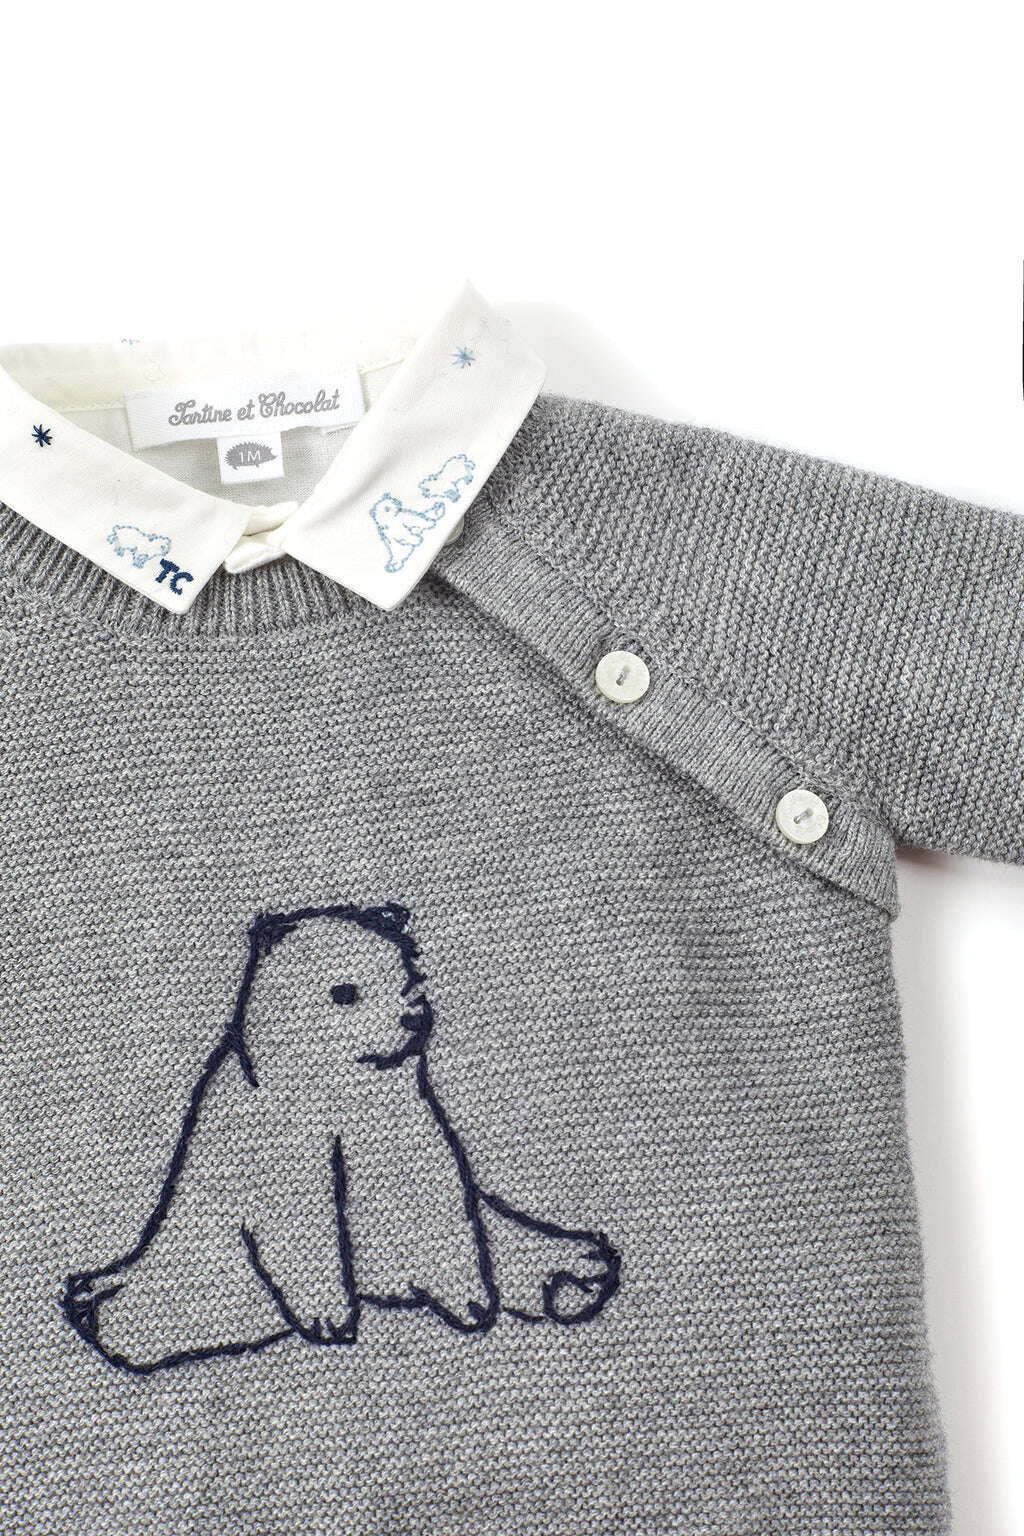 Pull - Gris chiné broderie ours